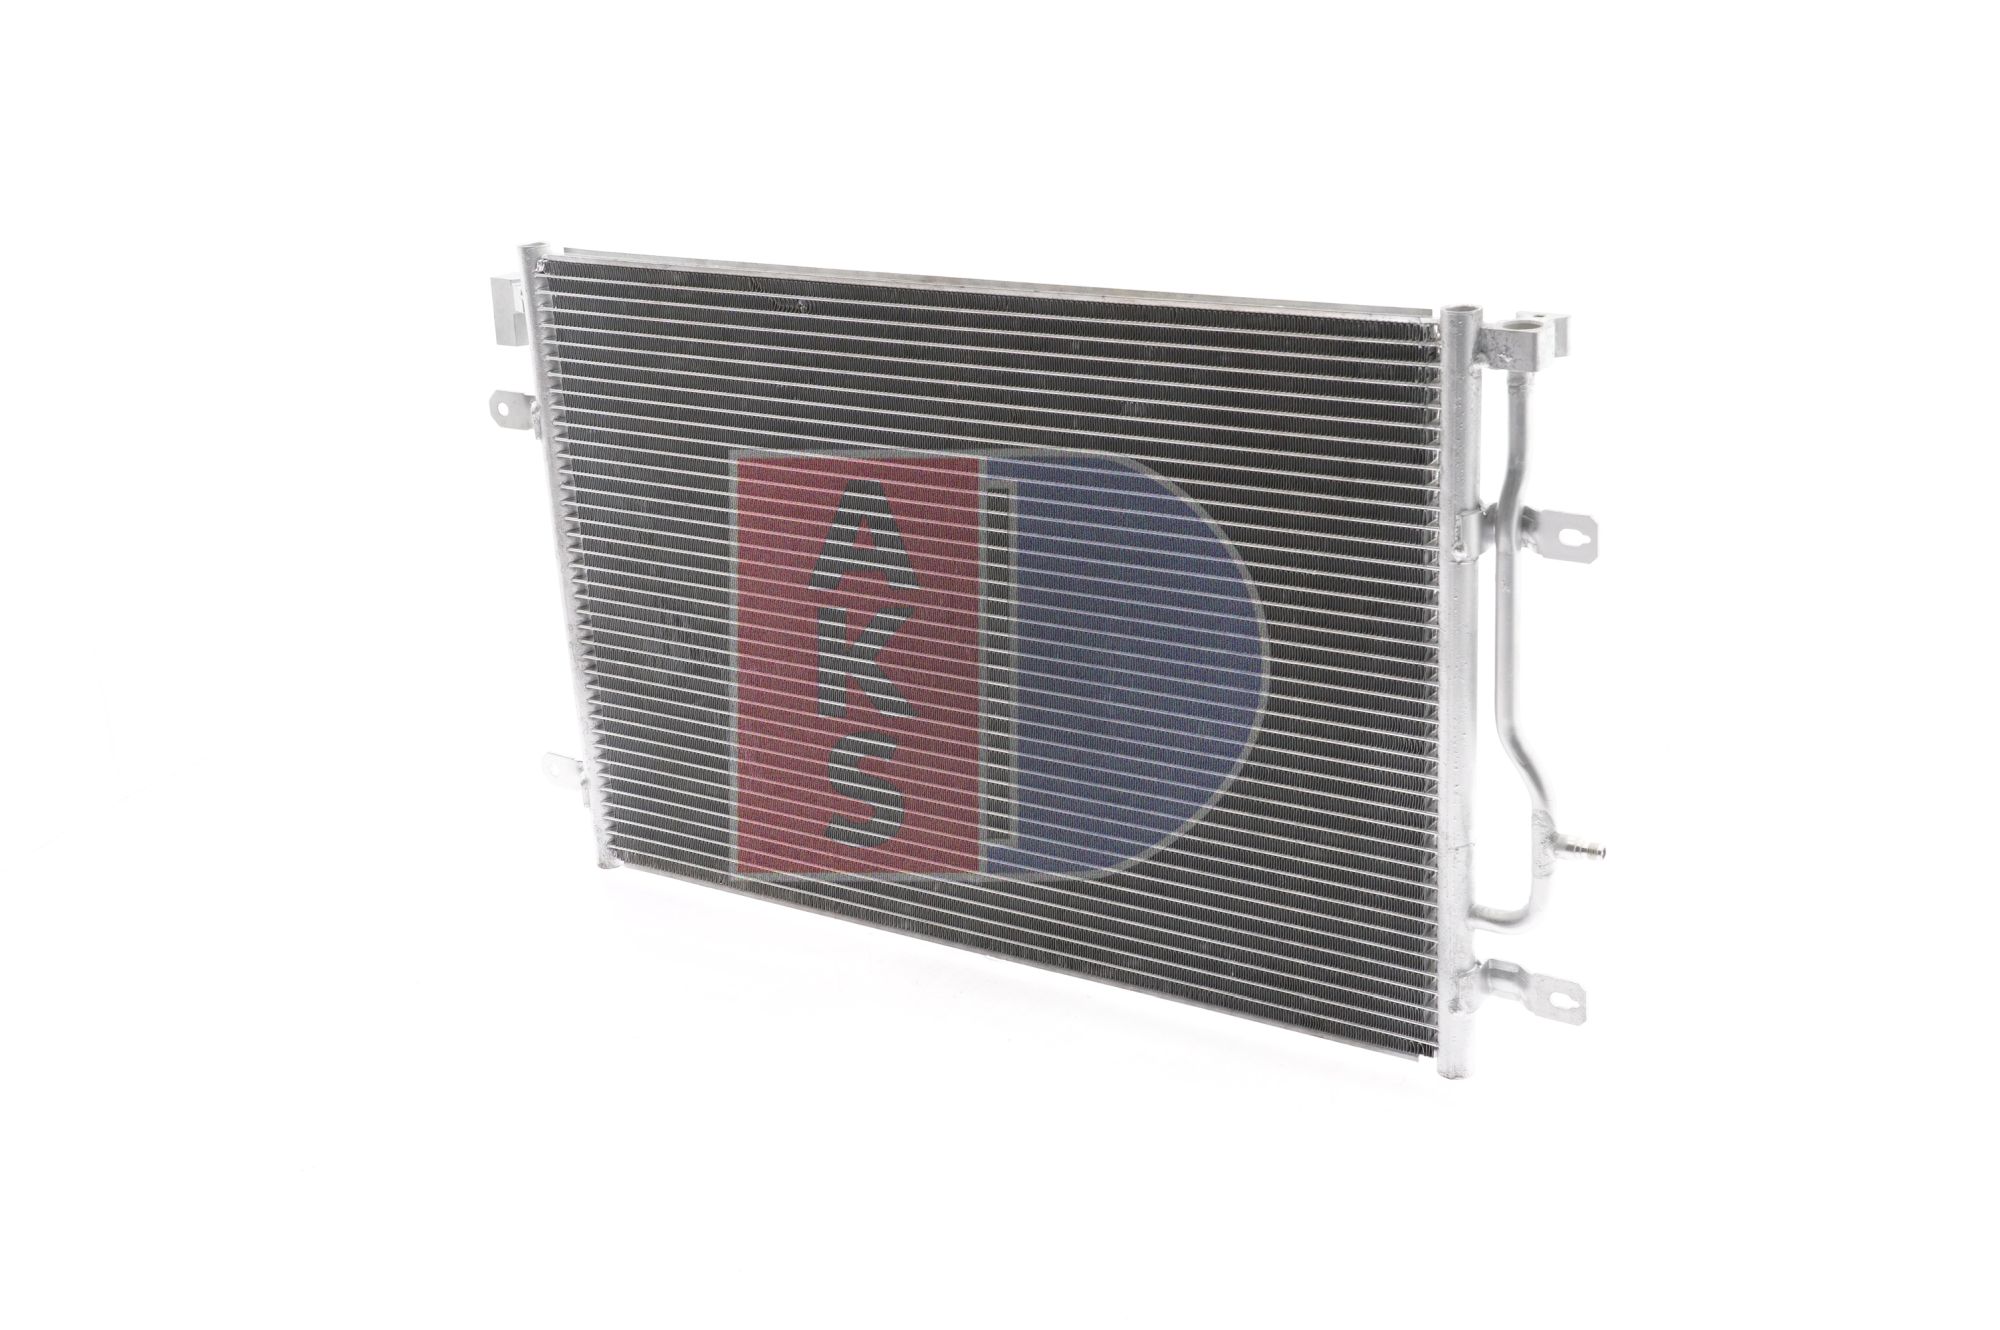 AKS DASIS 482001N Air conditioning condenser without dryer, 18mm, 15,2mm, 565mm